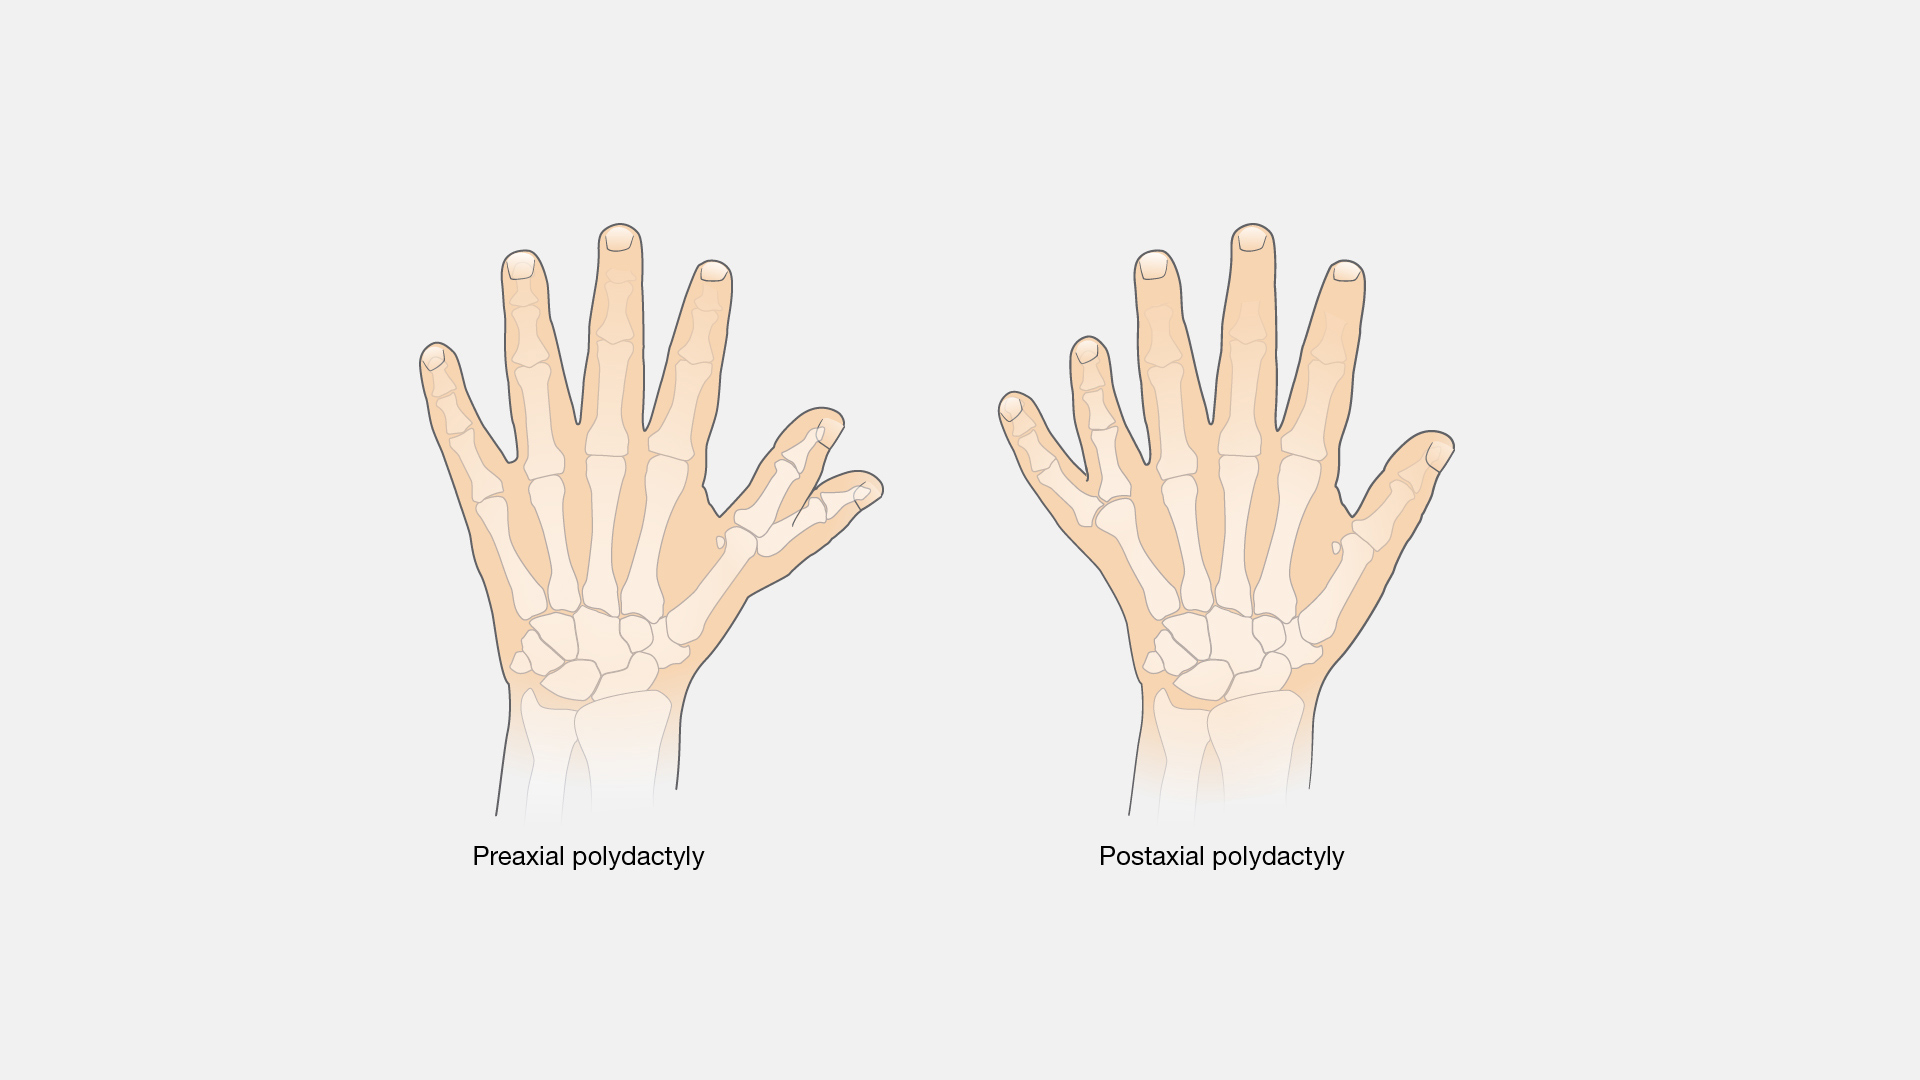  Polydactyly